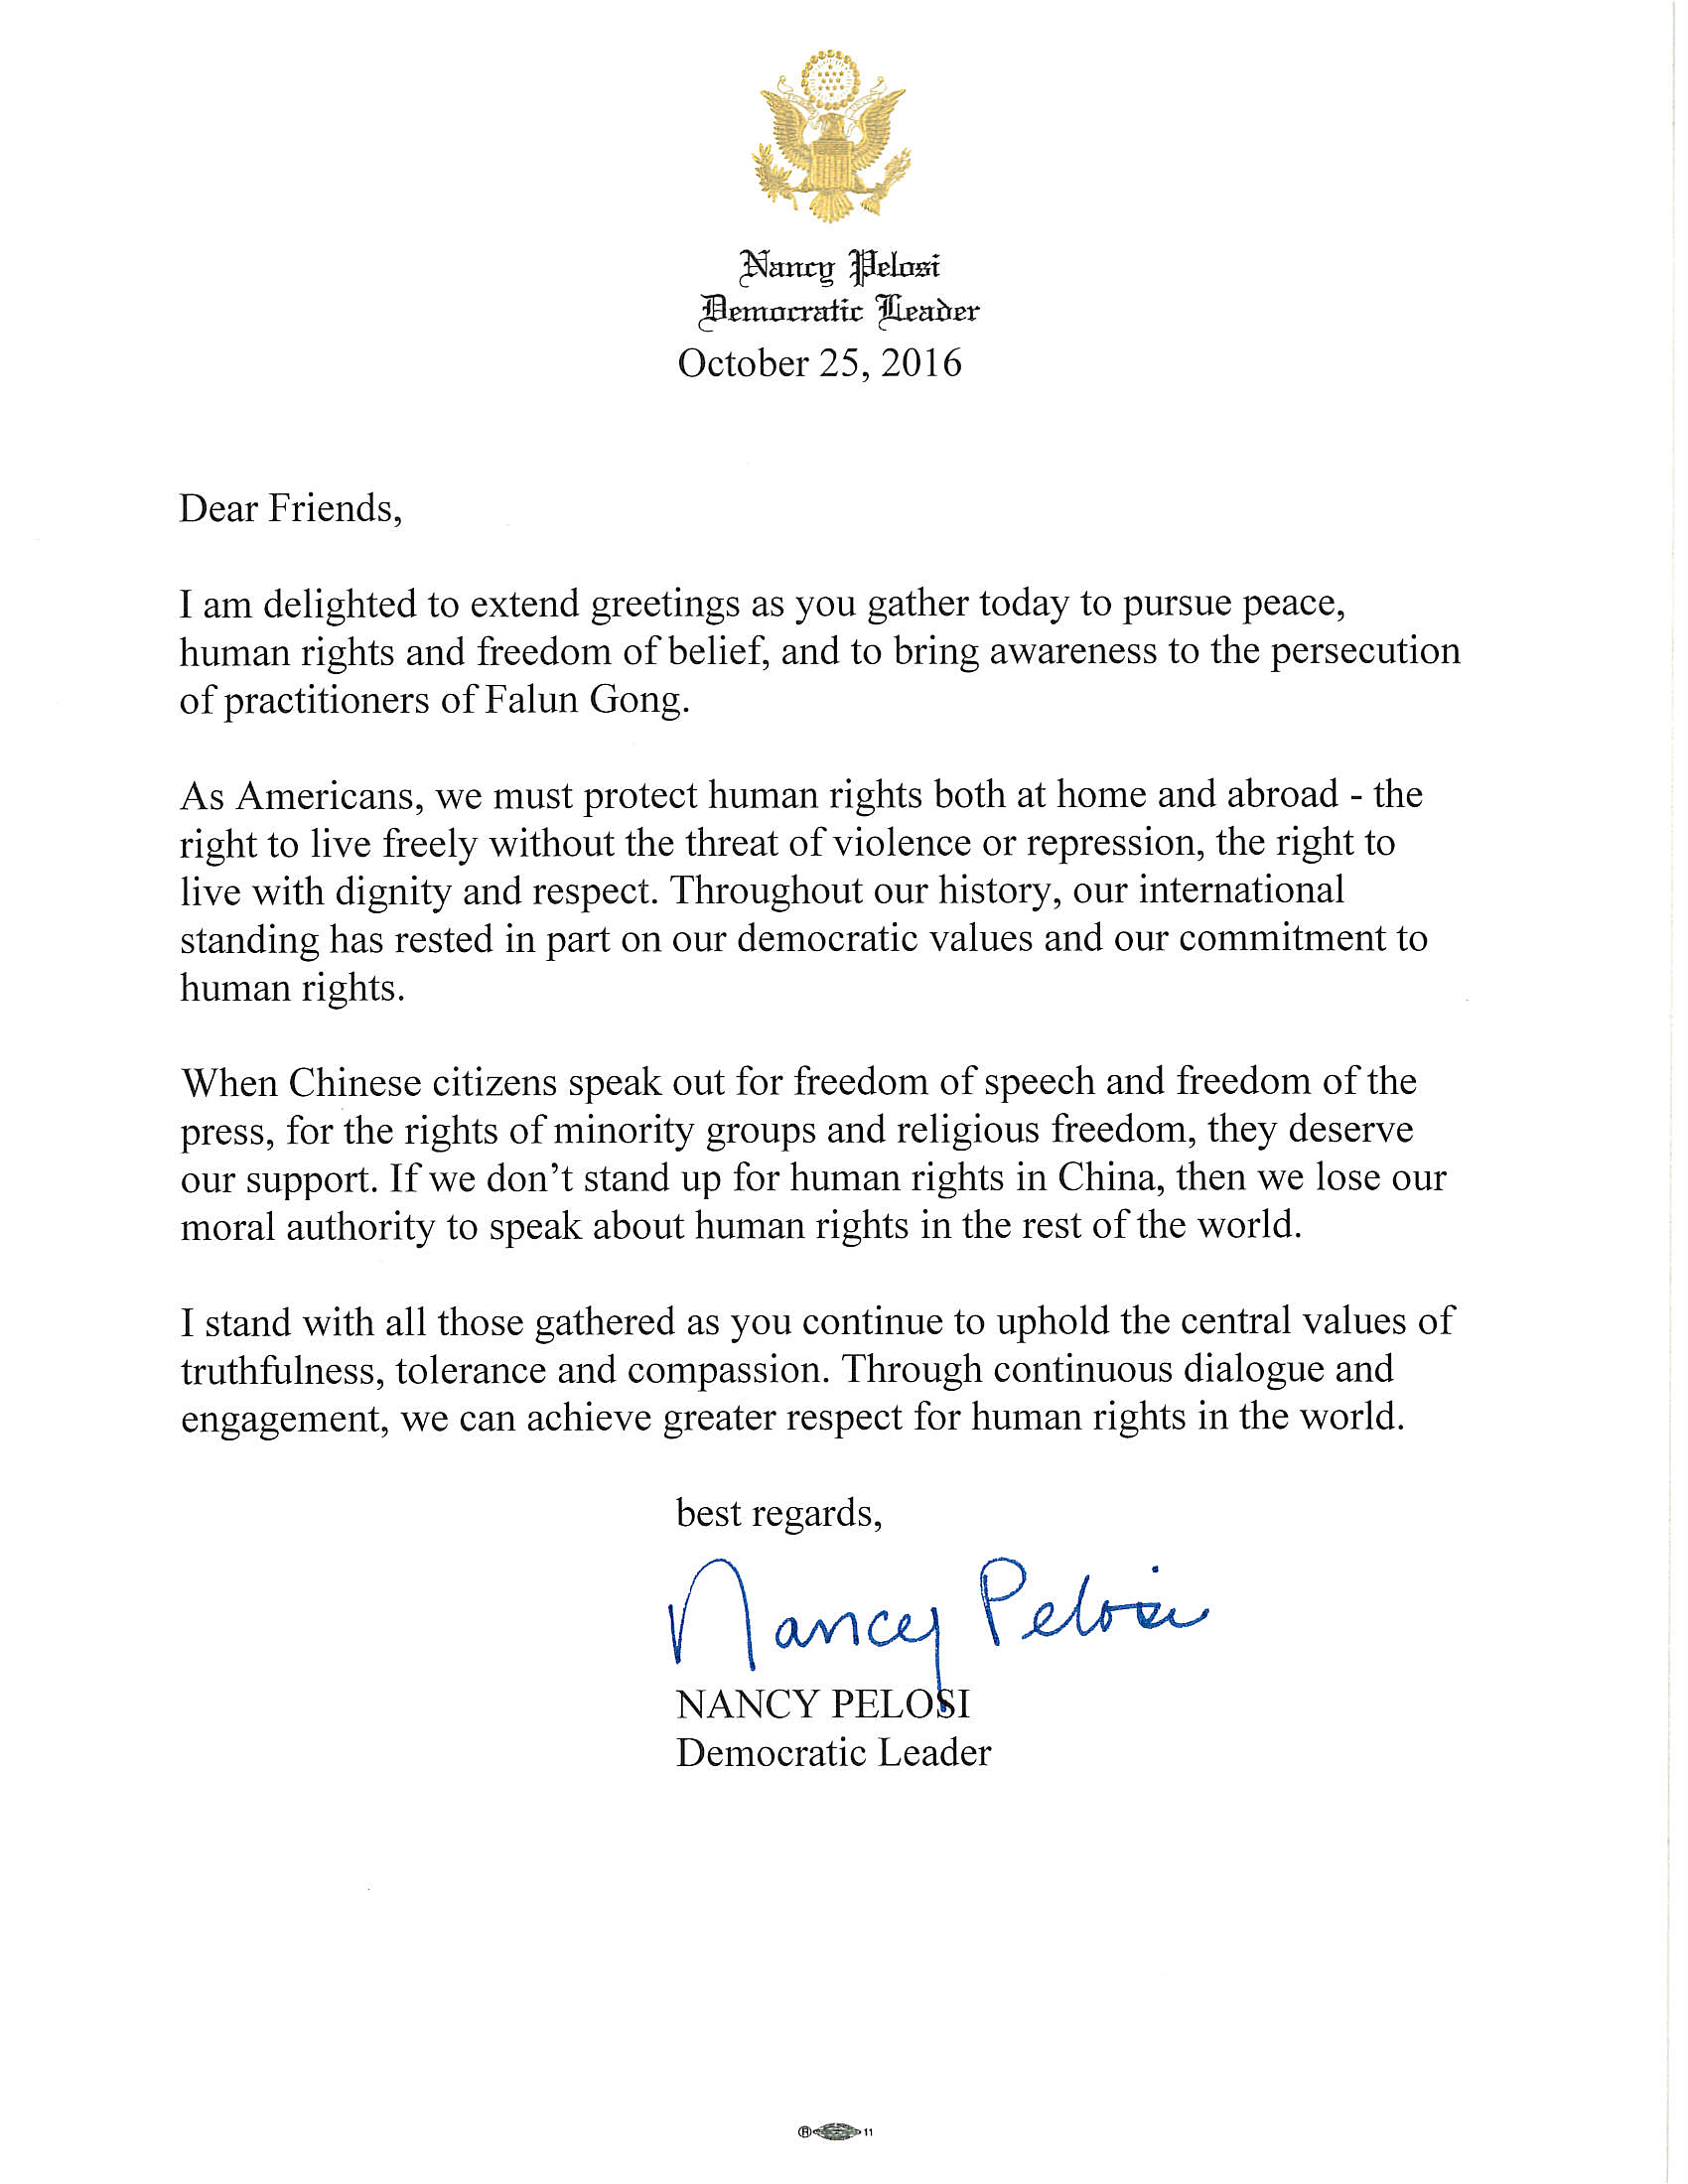 support-letter-from-pelosi